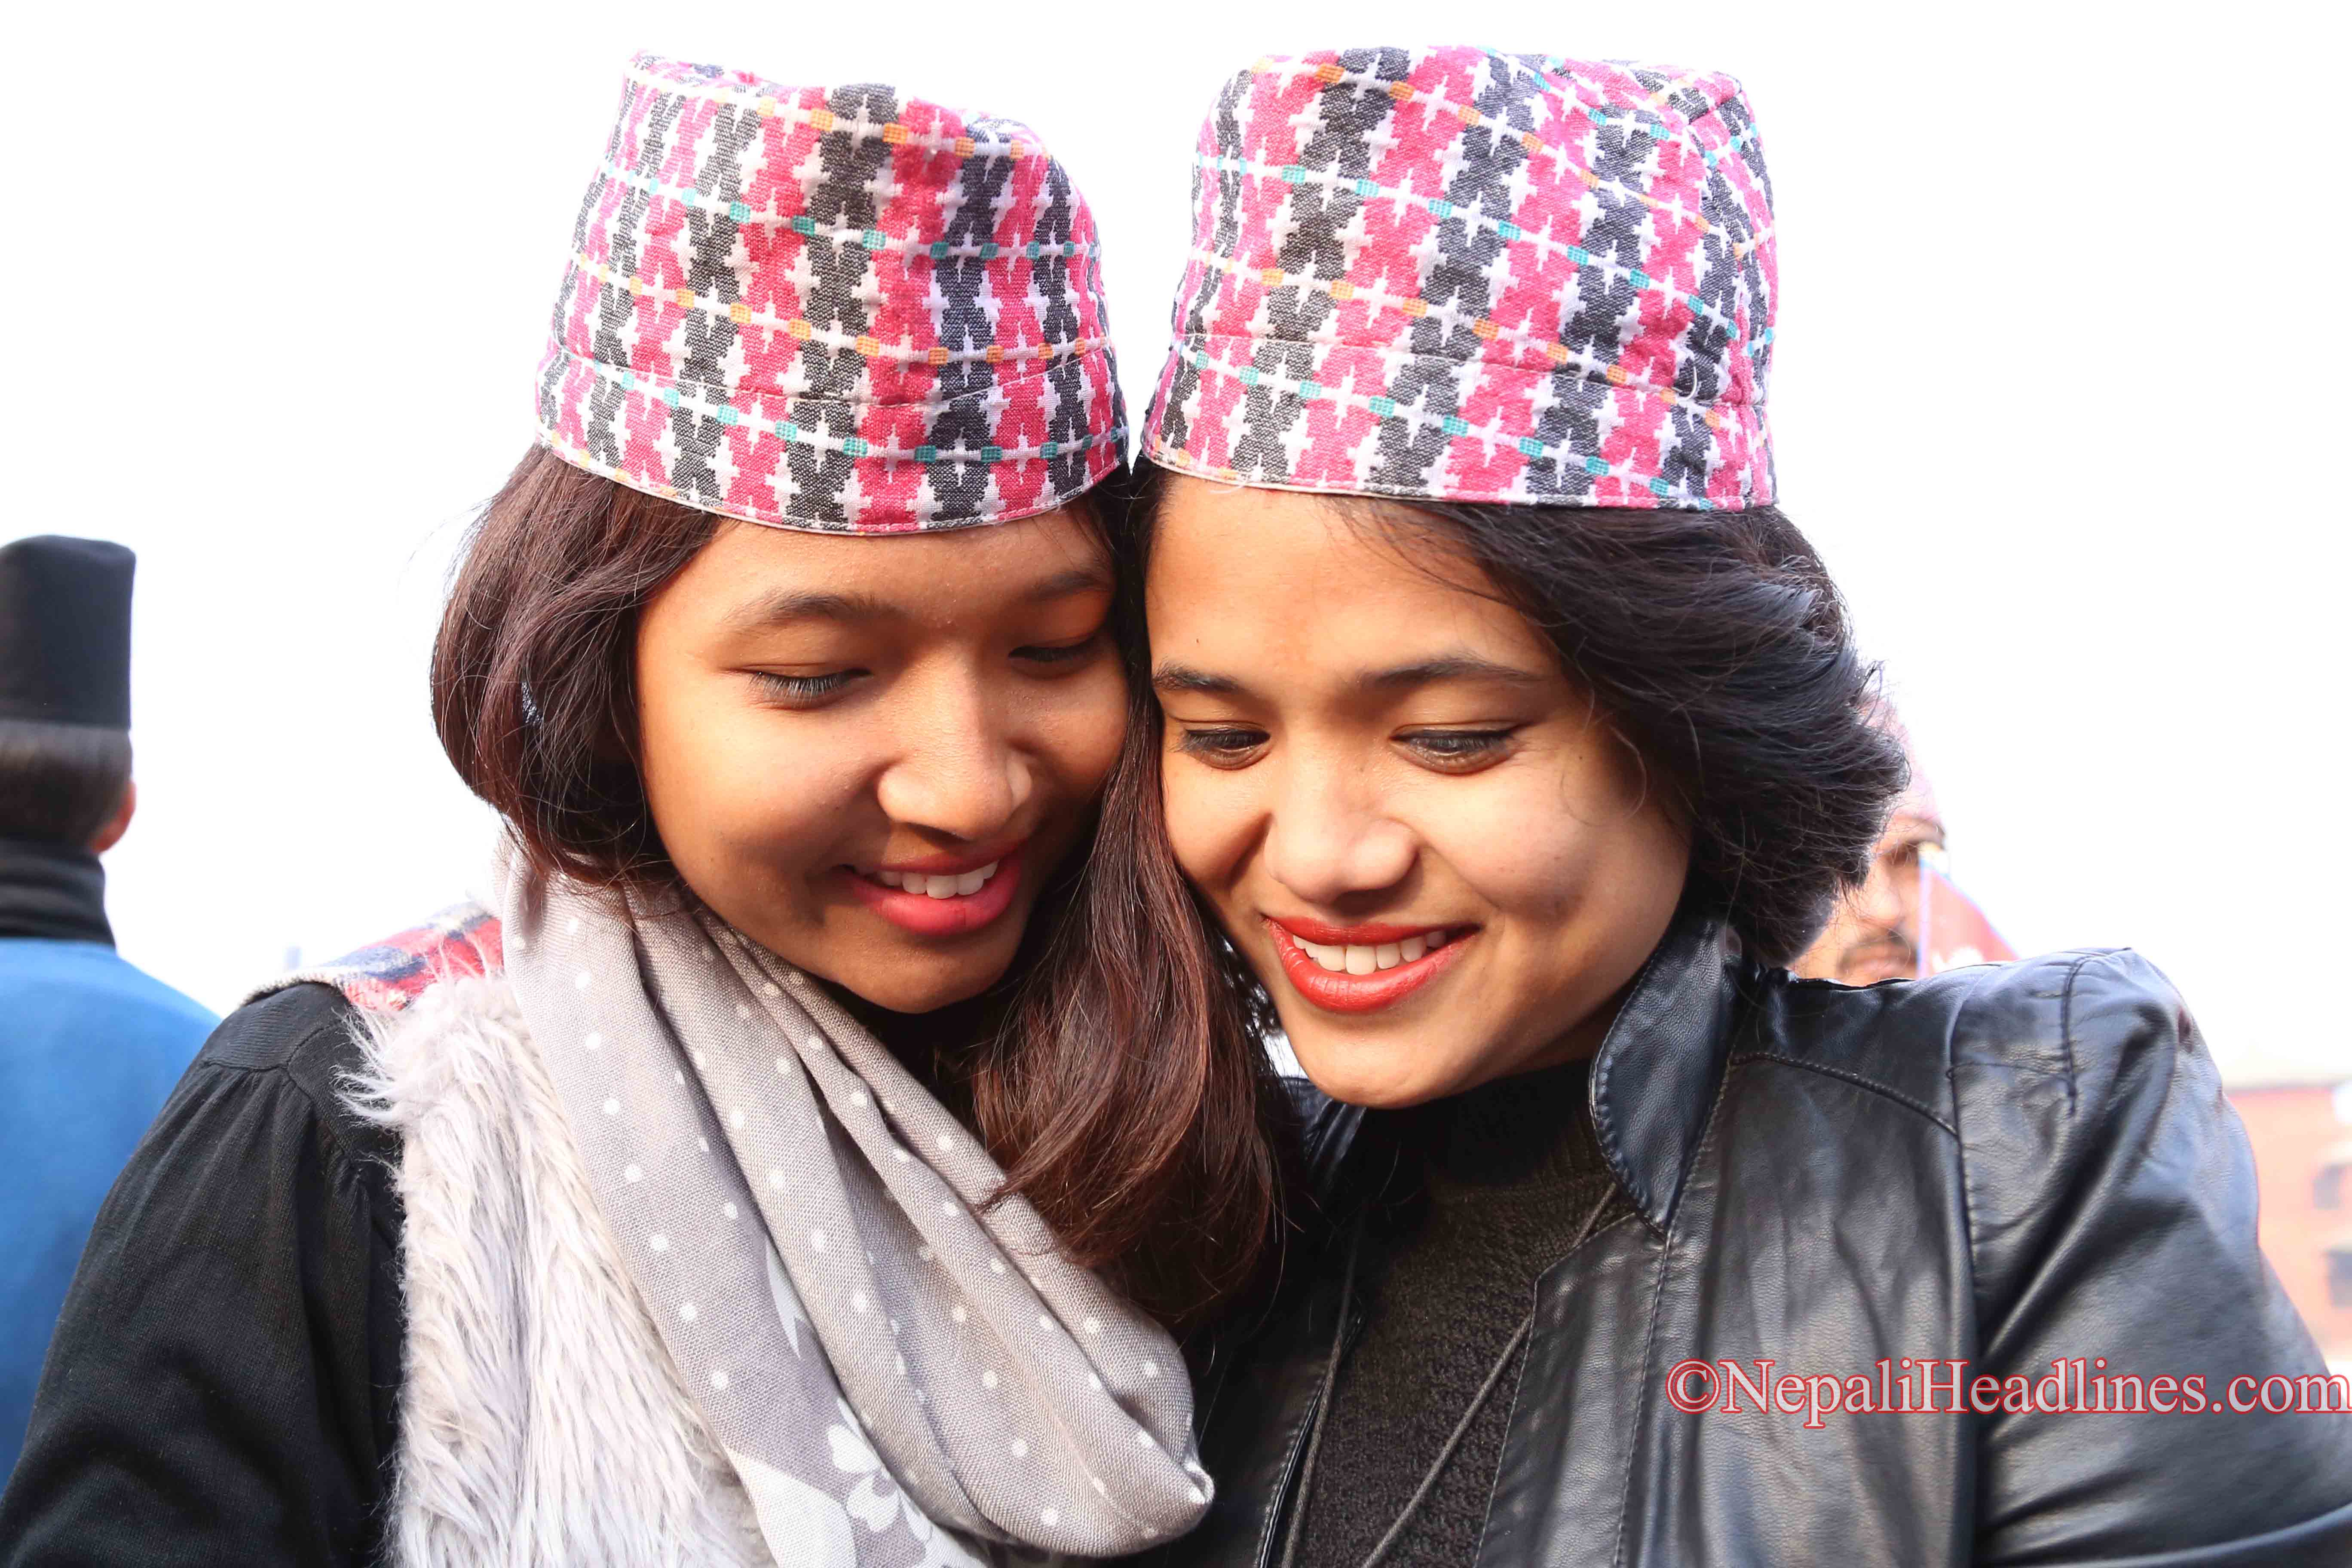 Appeal for celebrating Nepali Cap Day